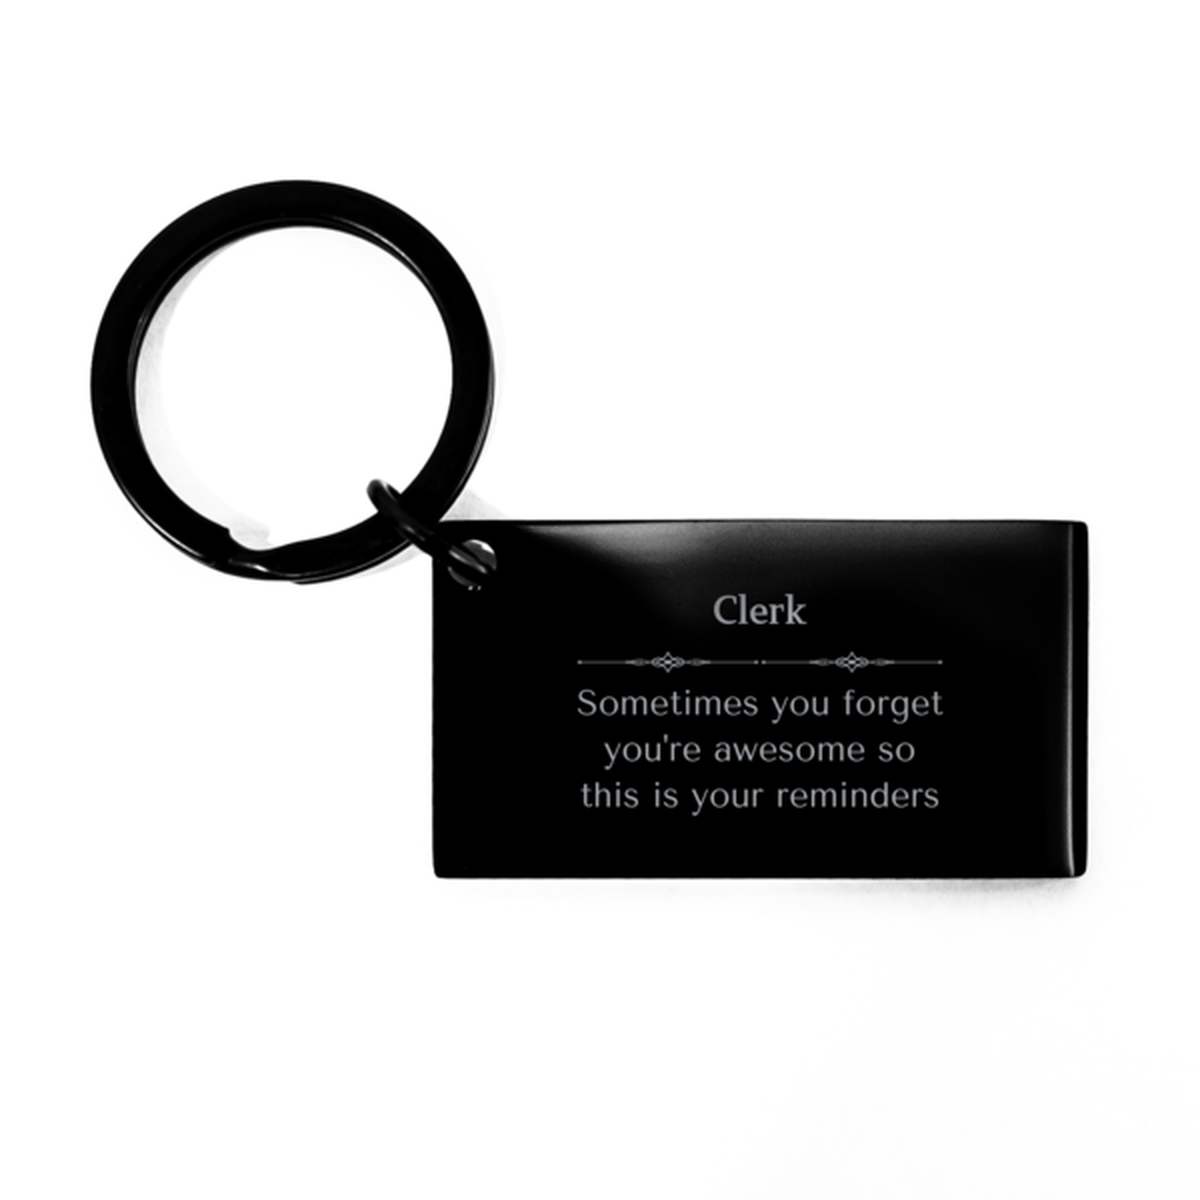 Sentimental Clerk Keychain, Driver Sometimes you forget you're awesome so this is your reminders, Graduation Christmas Birthday Gifts for Clerk, Men, Women, Coworkers